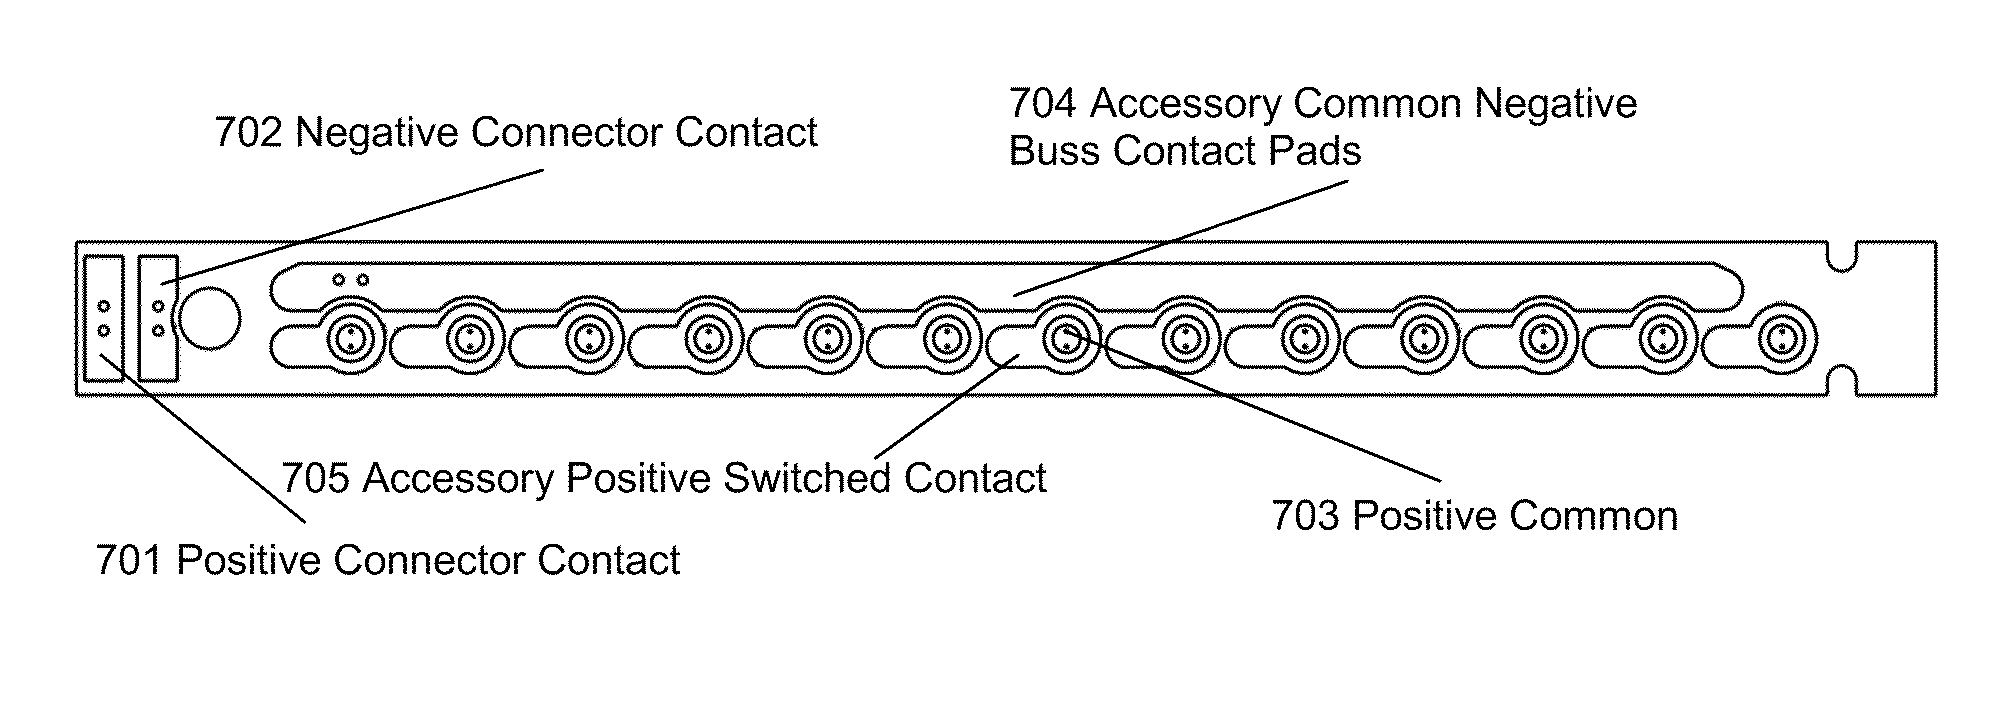 Rifle accessory rail, communication, and power transfer system-rail contacts